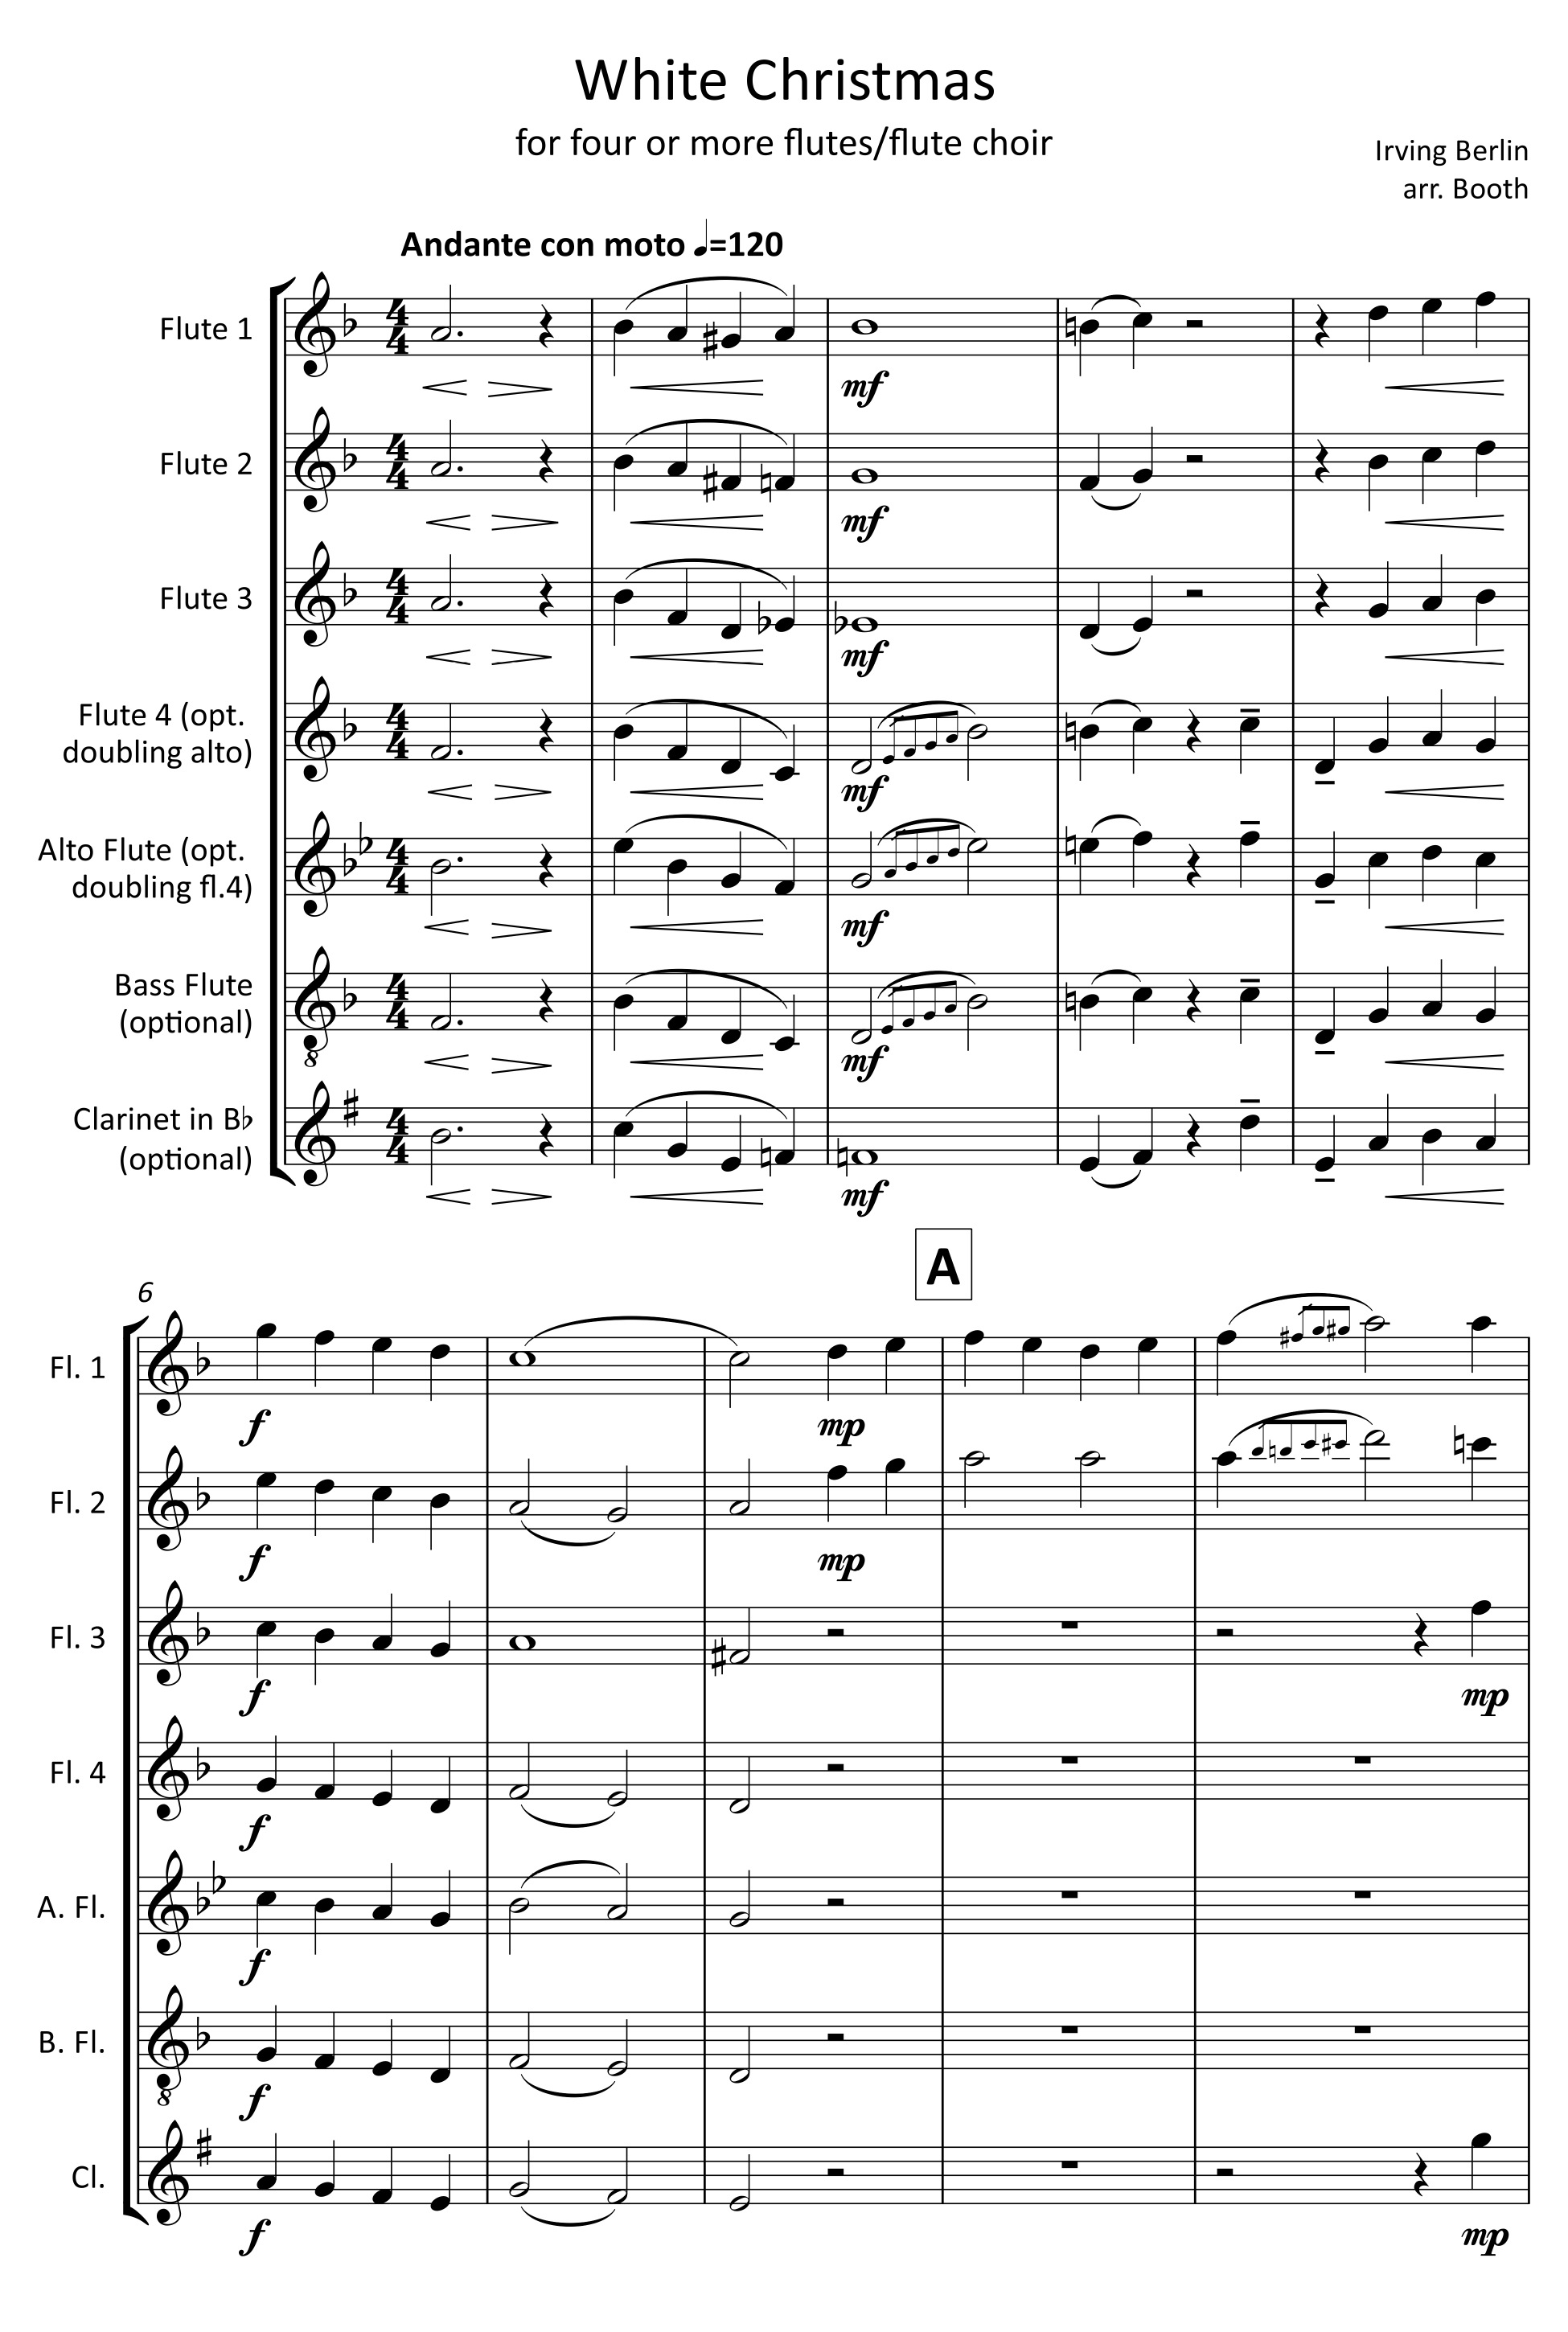 White Christmas by Irving Berlin,  arranged by Zoë Booth for four or more flutes/flute choir